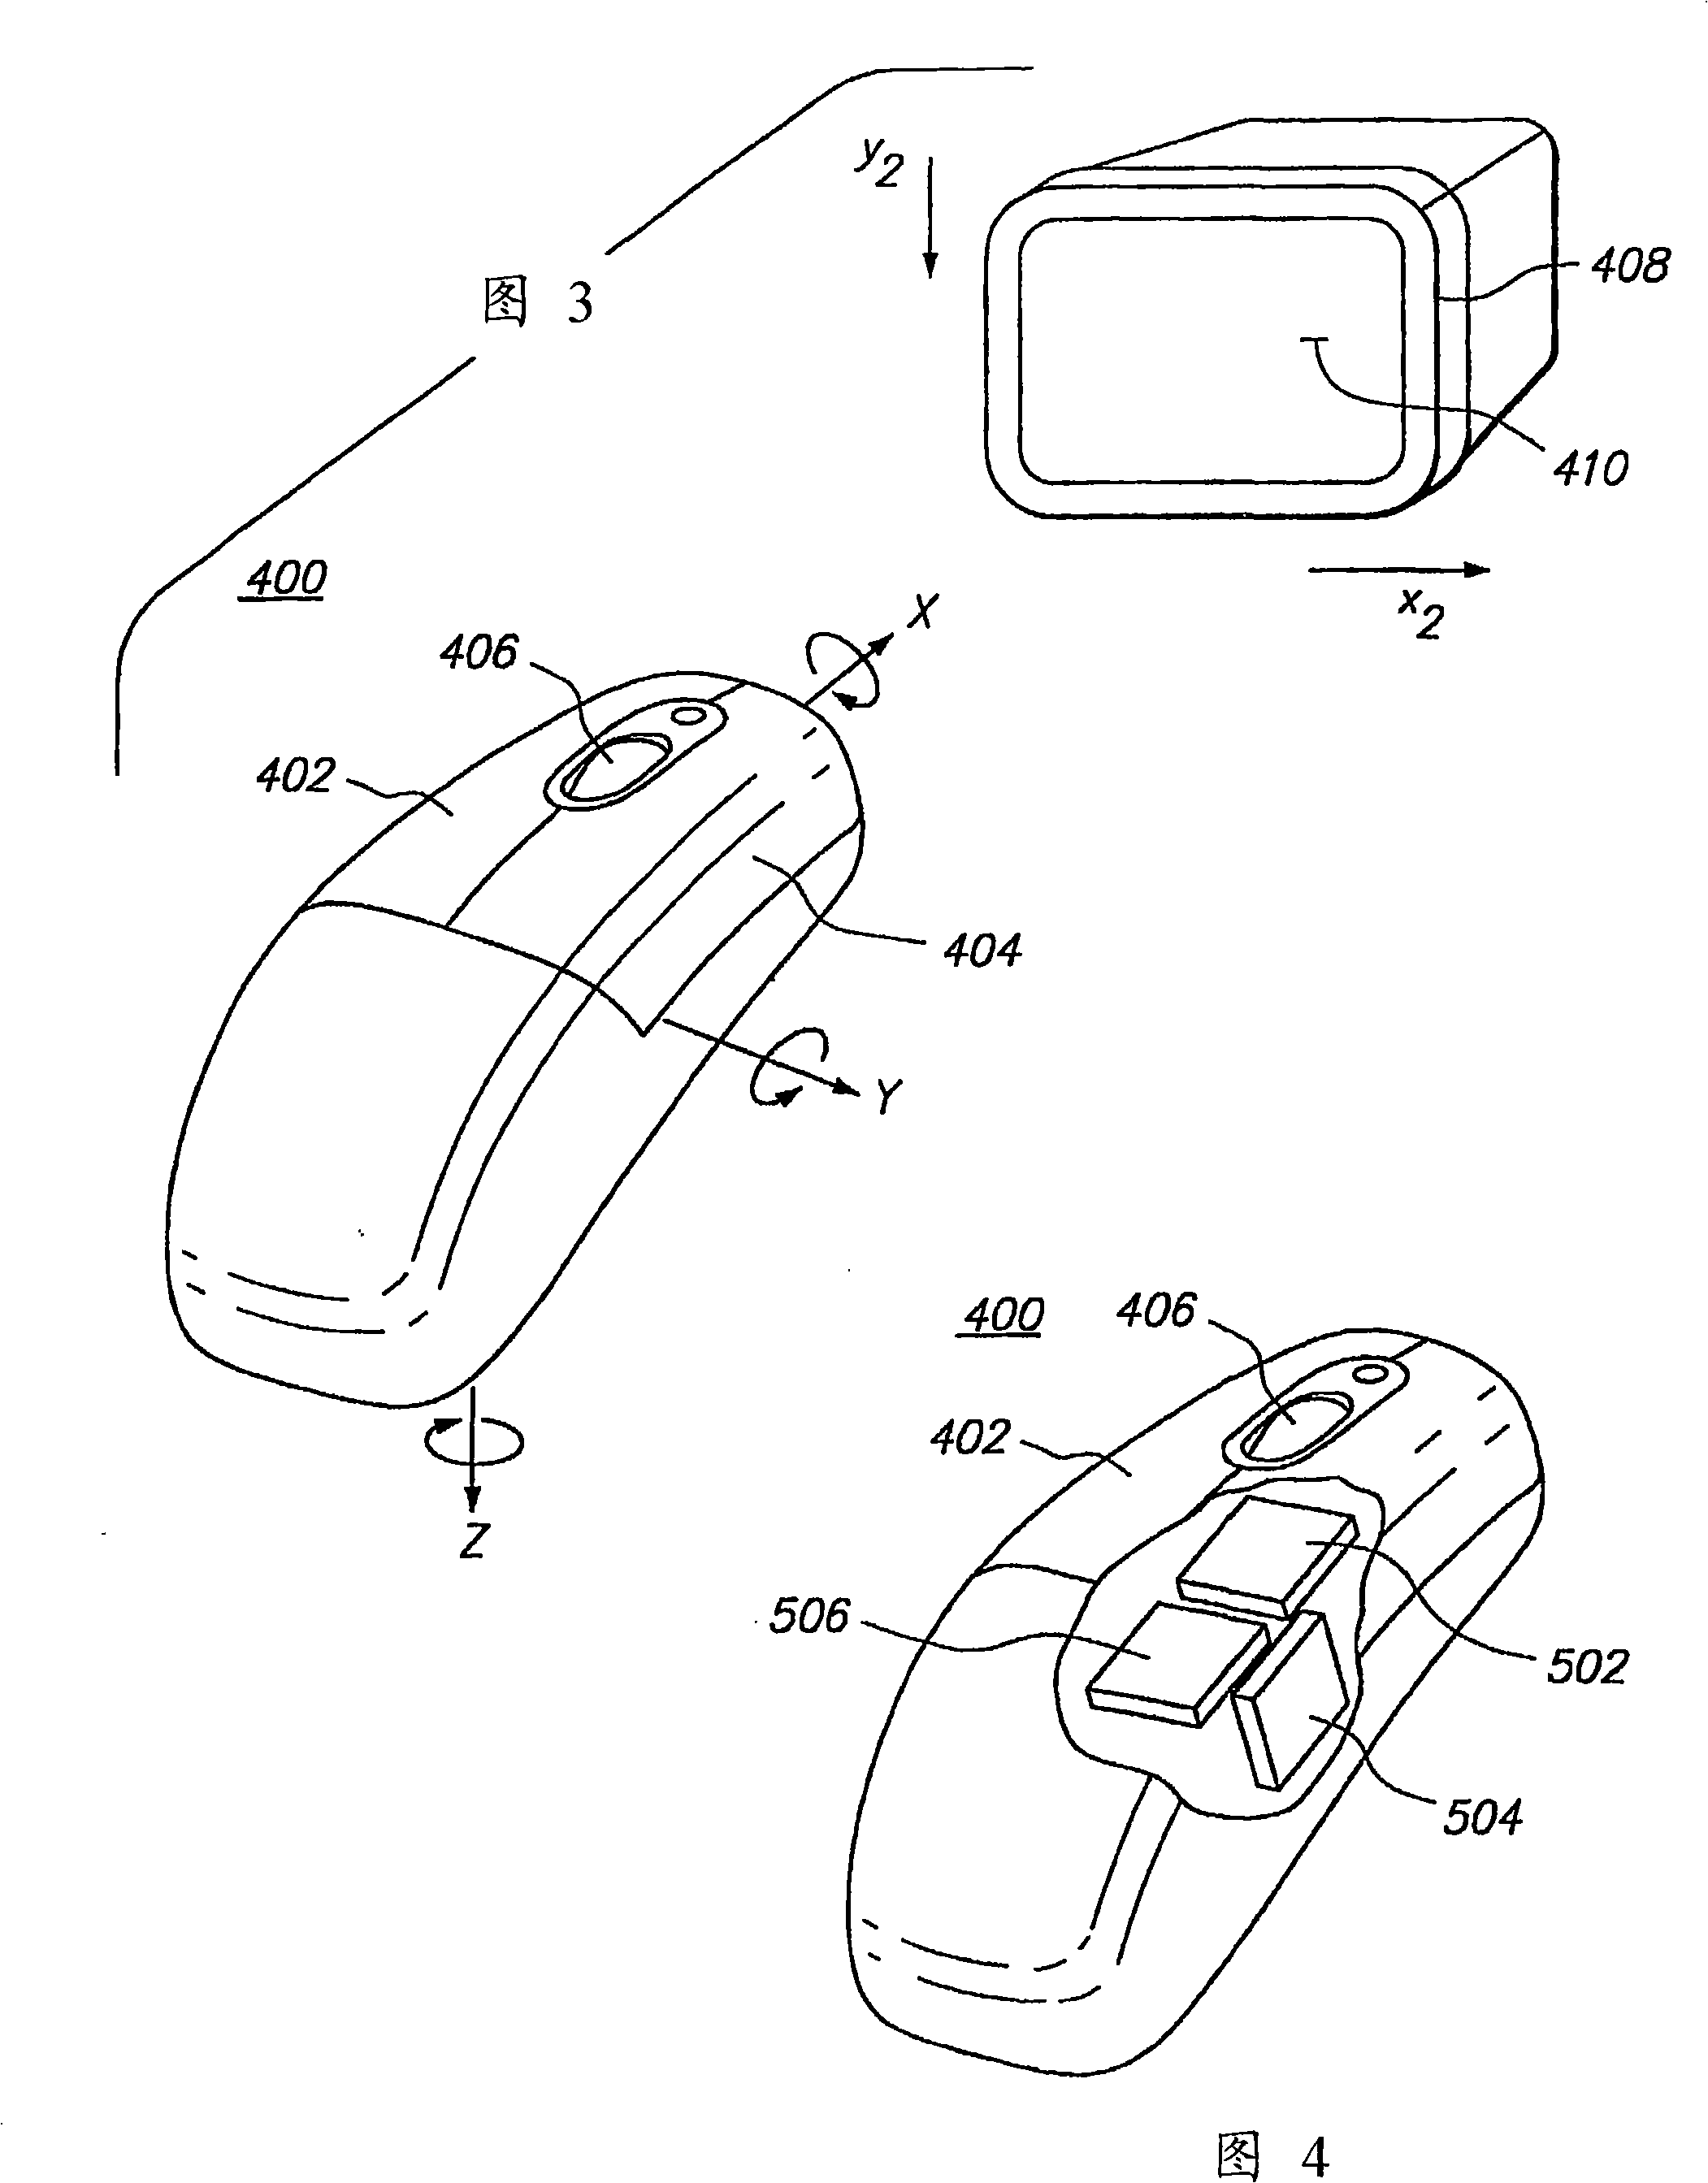 Free space pointing devices with tilt compensation and improved usability